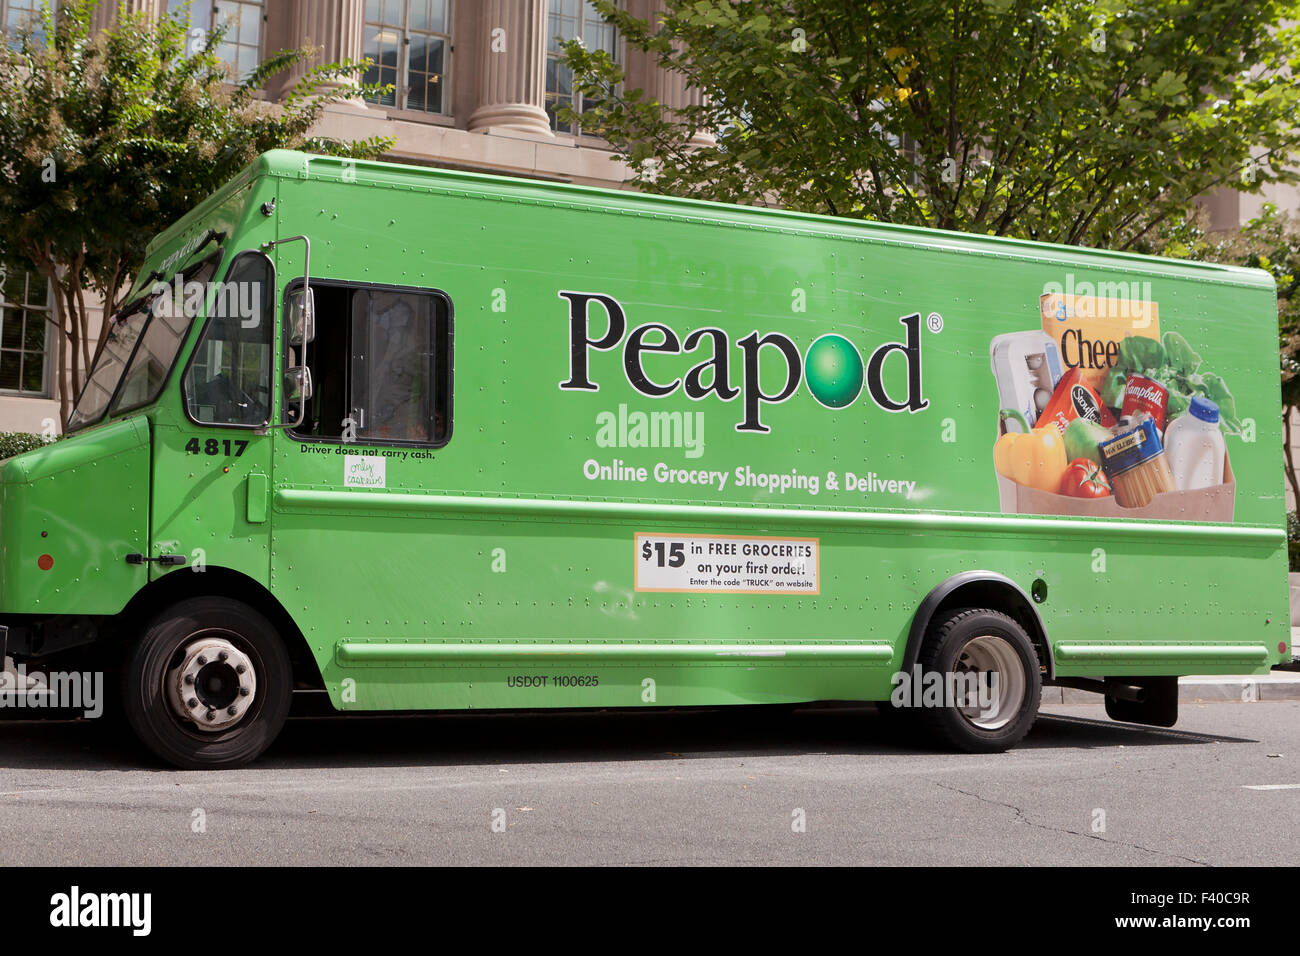 Peapod by Giant delivery truck - Washington, DC USA Stock Photo